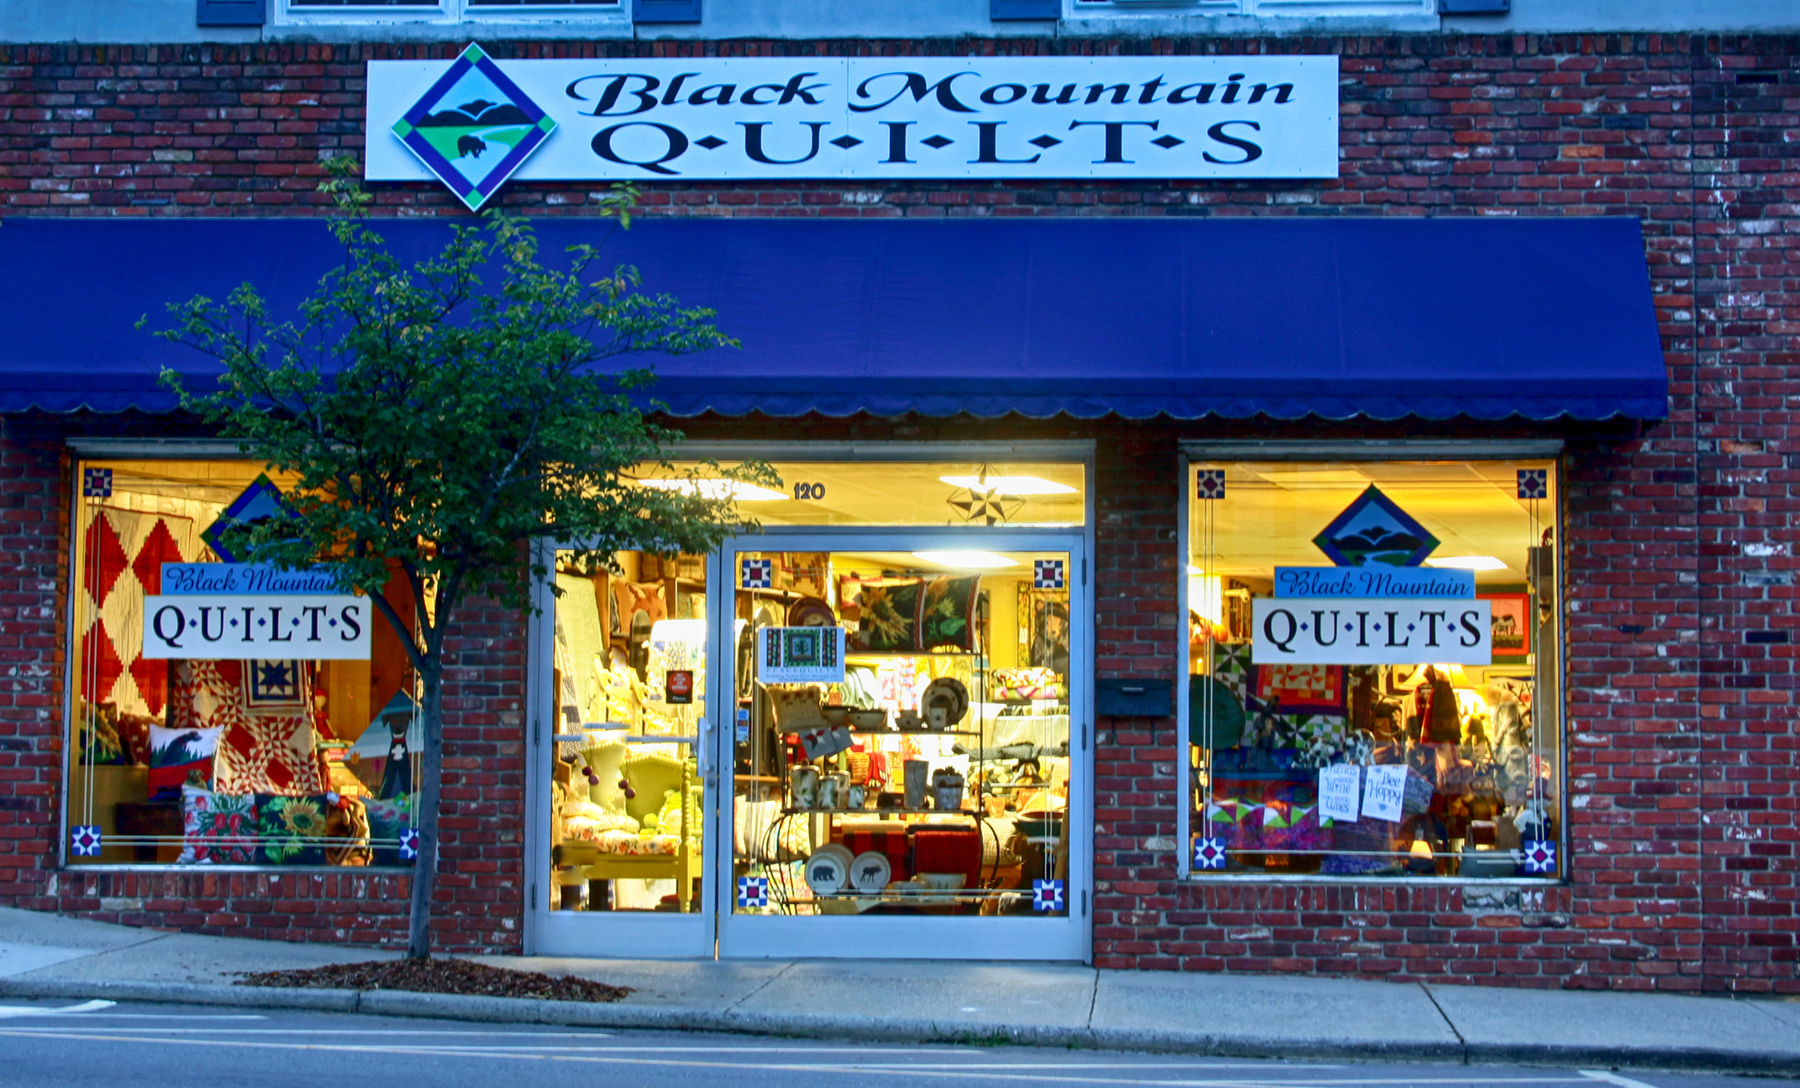 Black Mountain Home & Accents